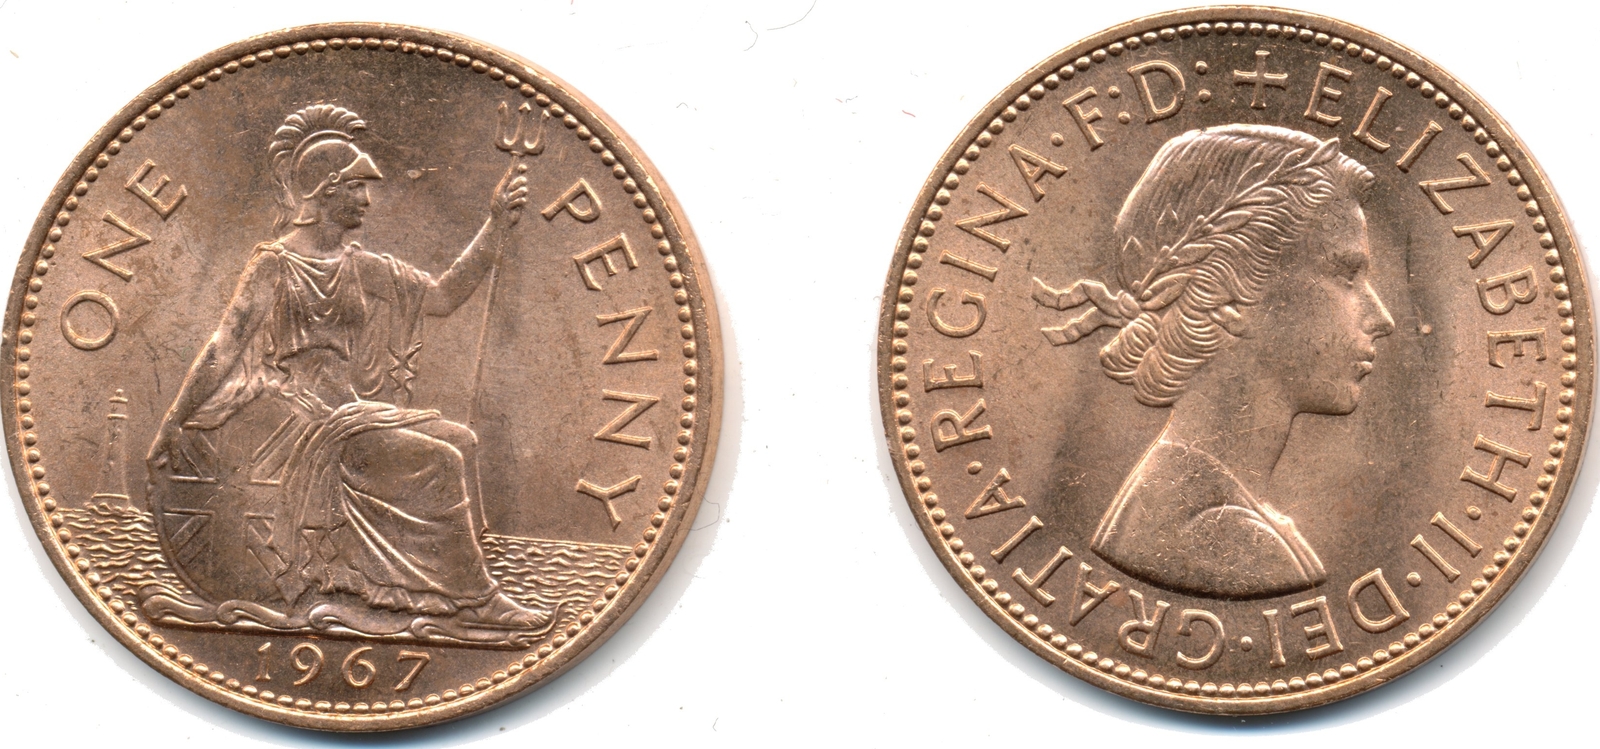 Britain is not looking for easy ways...Part 2 - My, Numismatics, Great Britain, Story, Interesting, Longpost